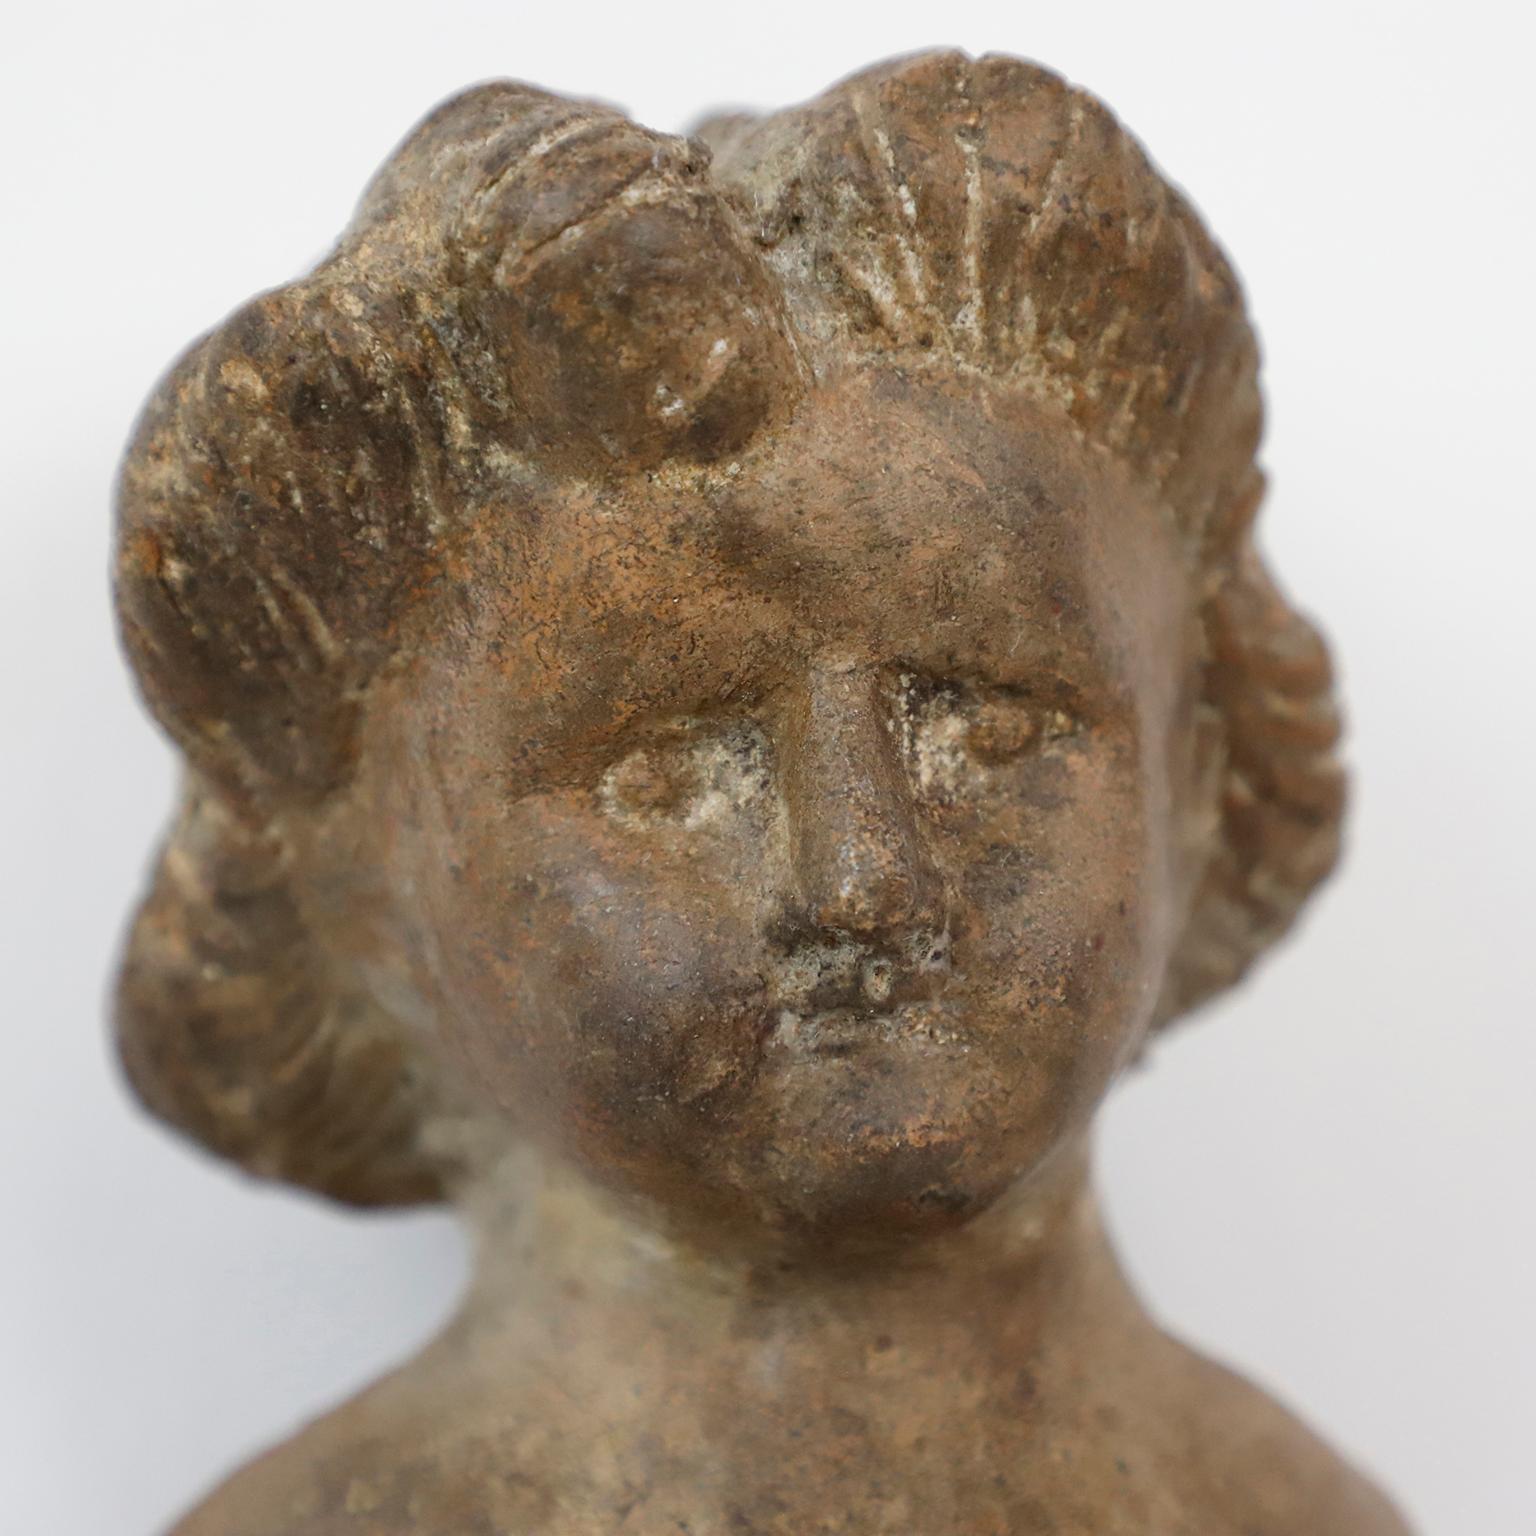 We offer this Mexican articulated Doll Mold, early 20th century.